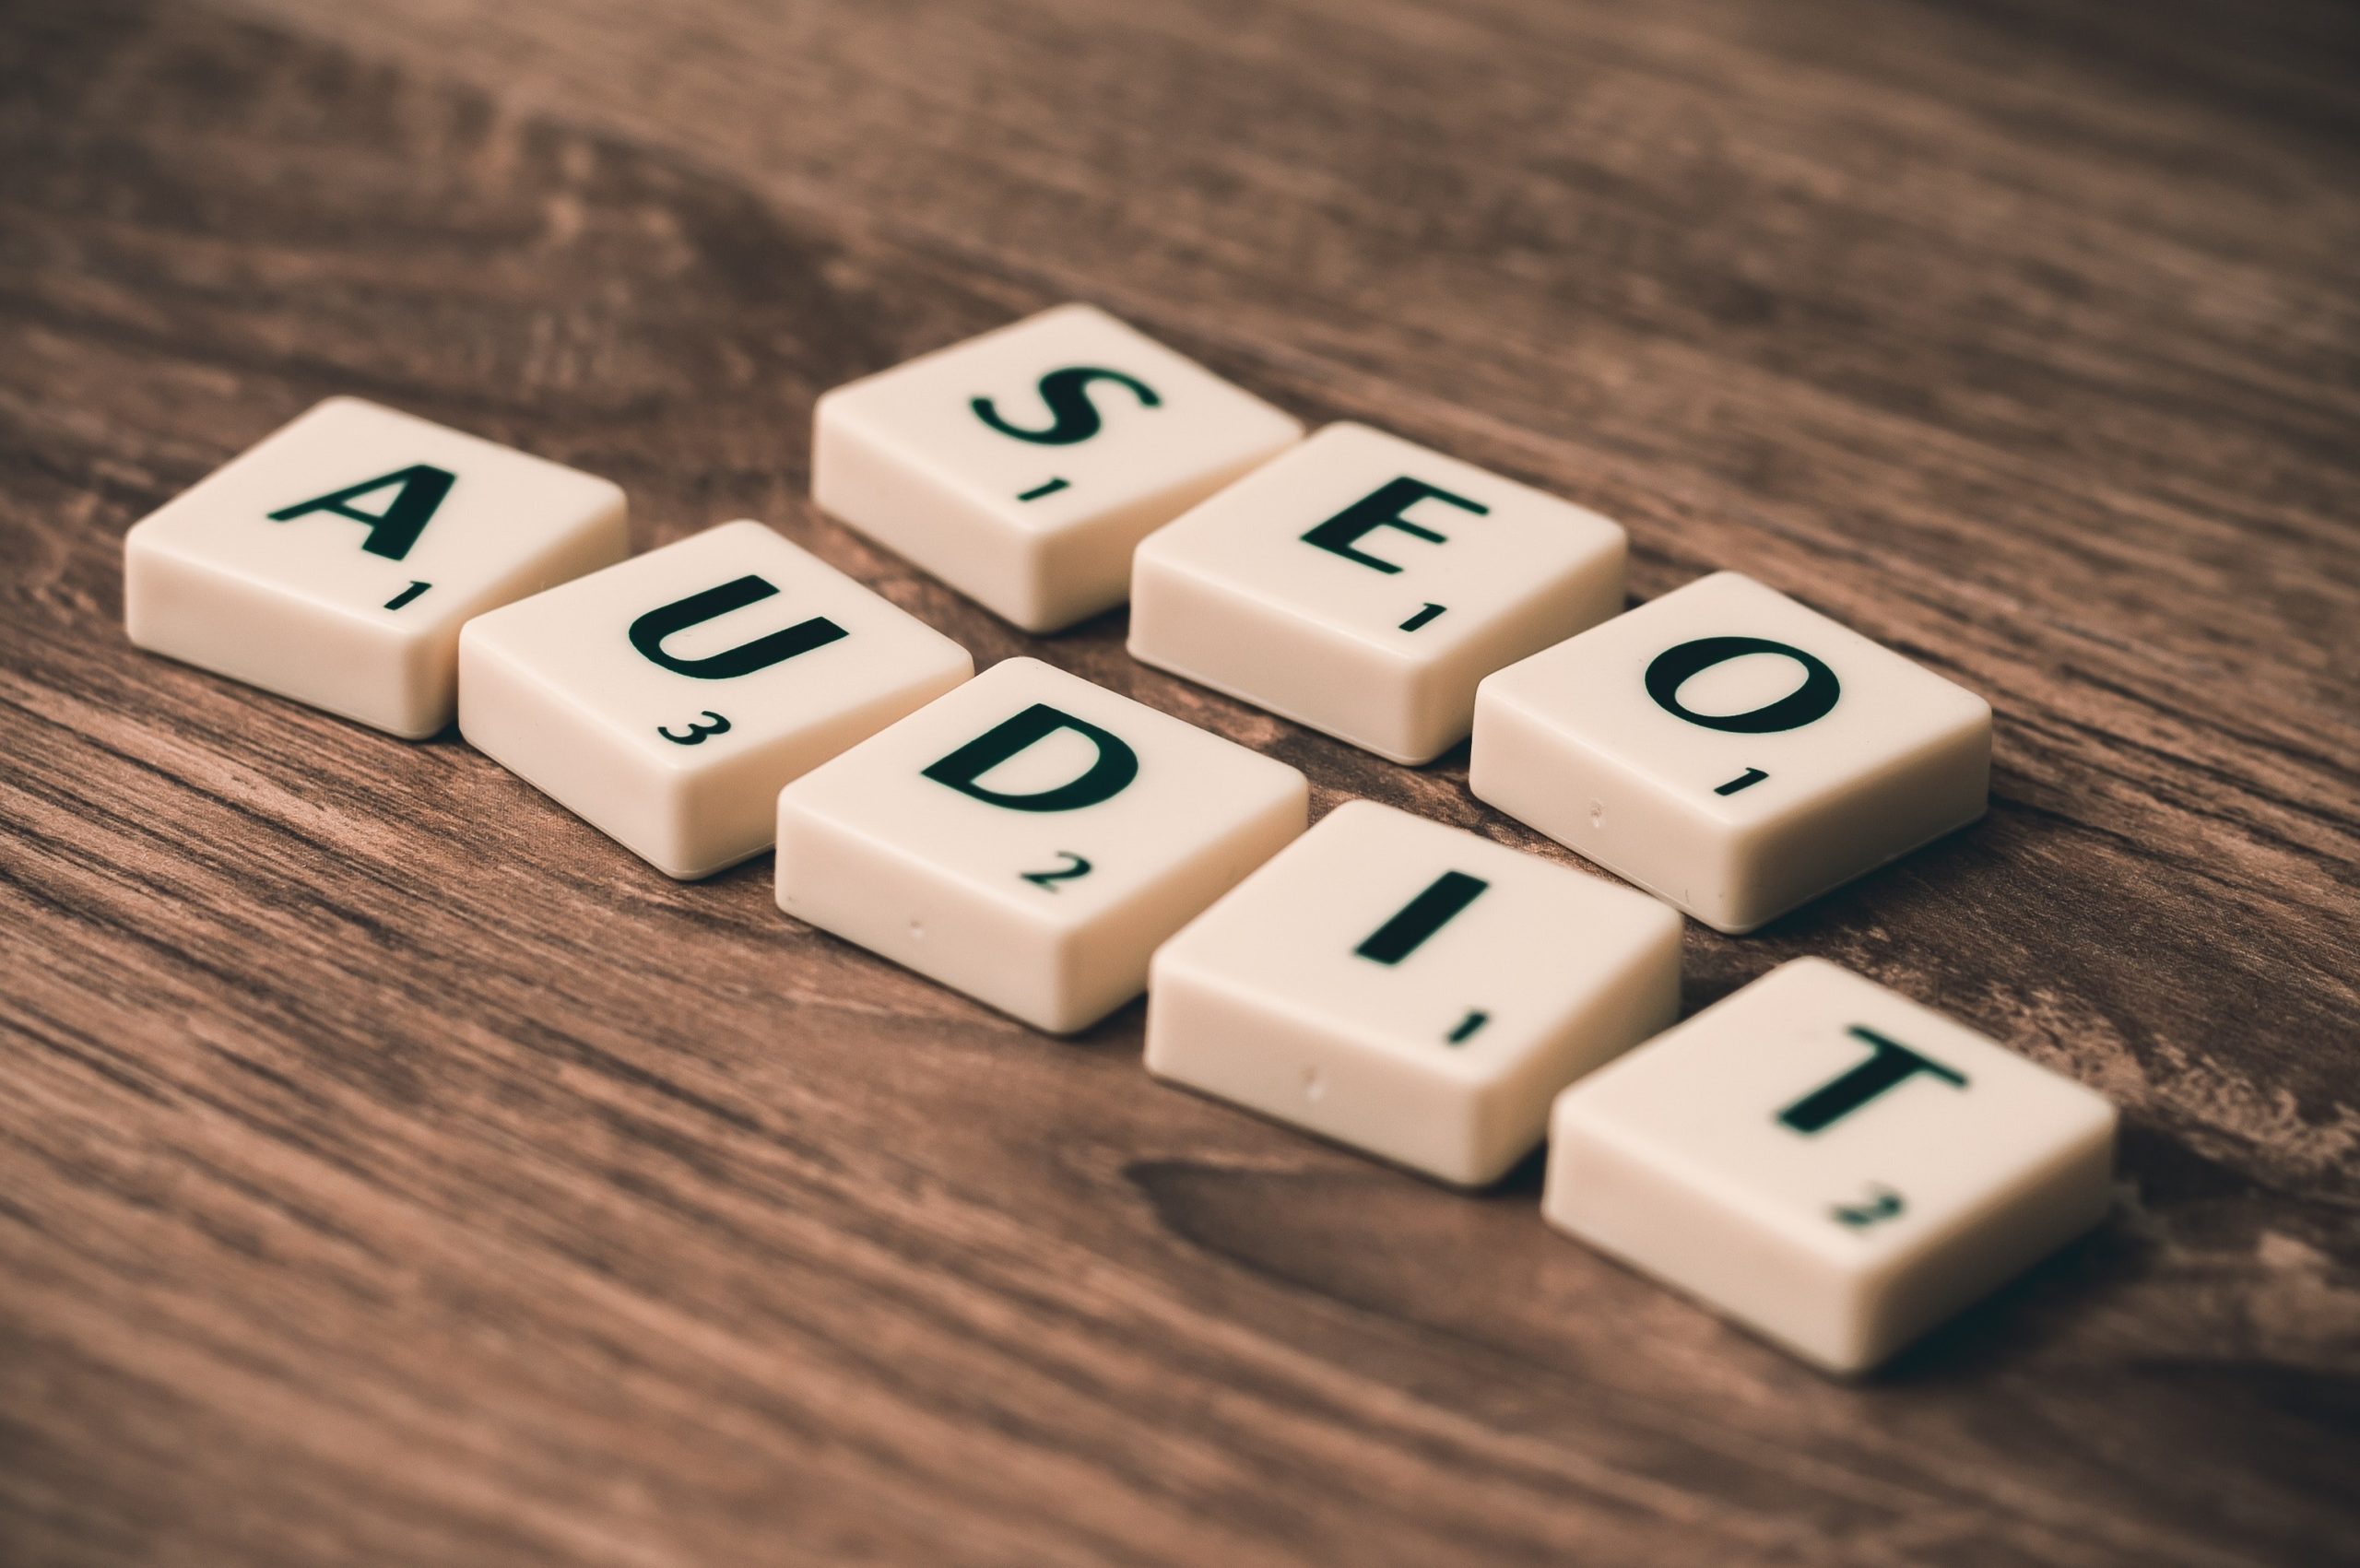 How to conduct an international SEO audit? What’s the most important?